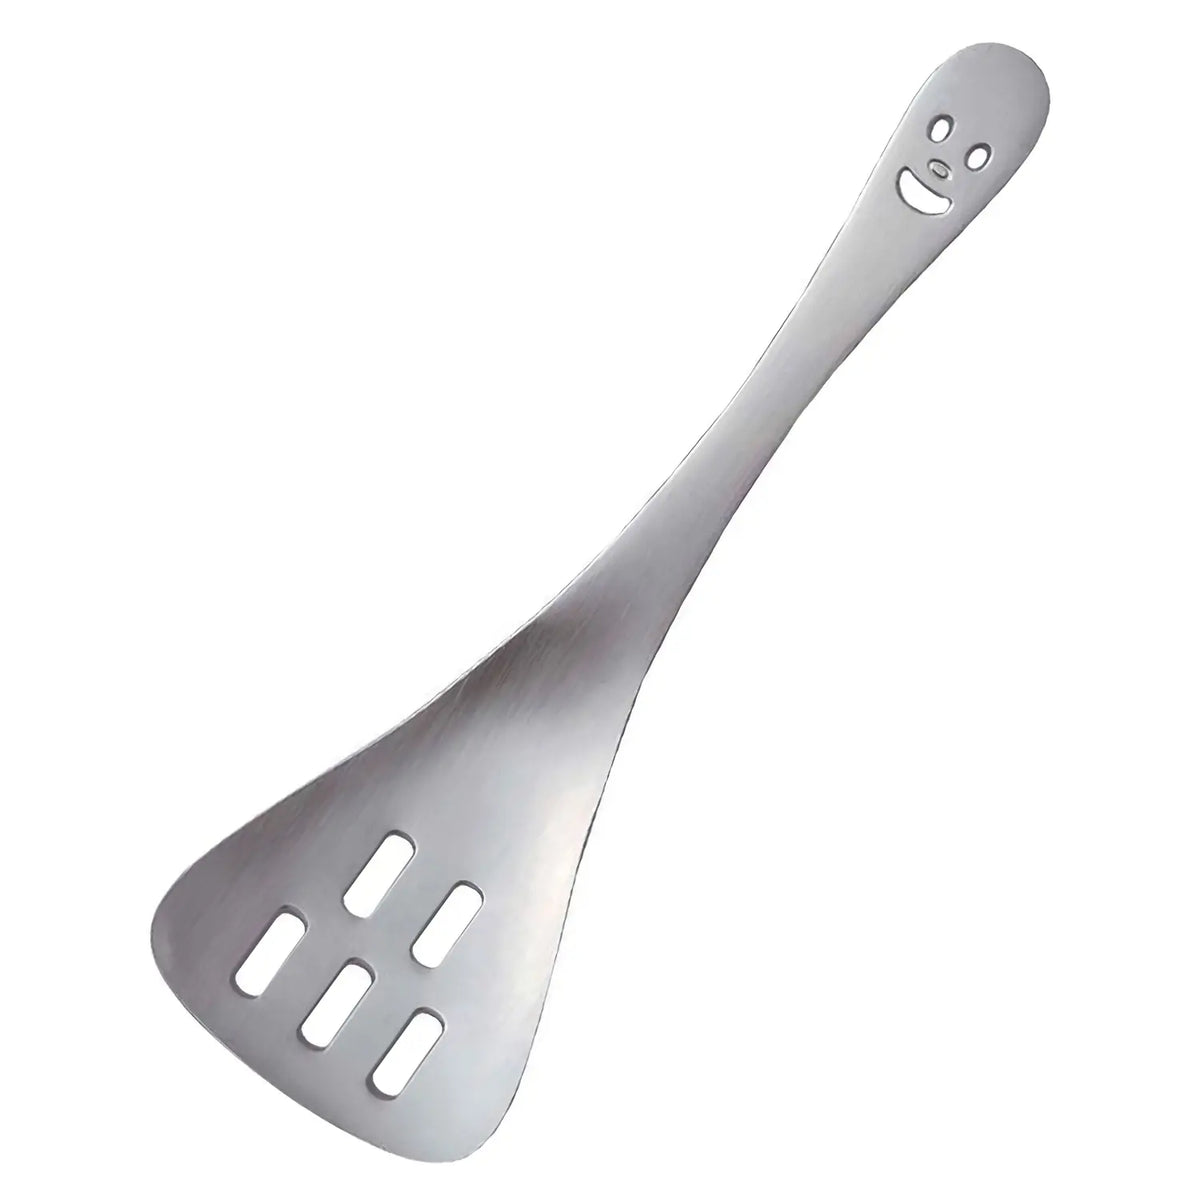 Wada Nico Stainless Steel Perforated Serving Spoon 6.6cm